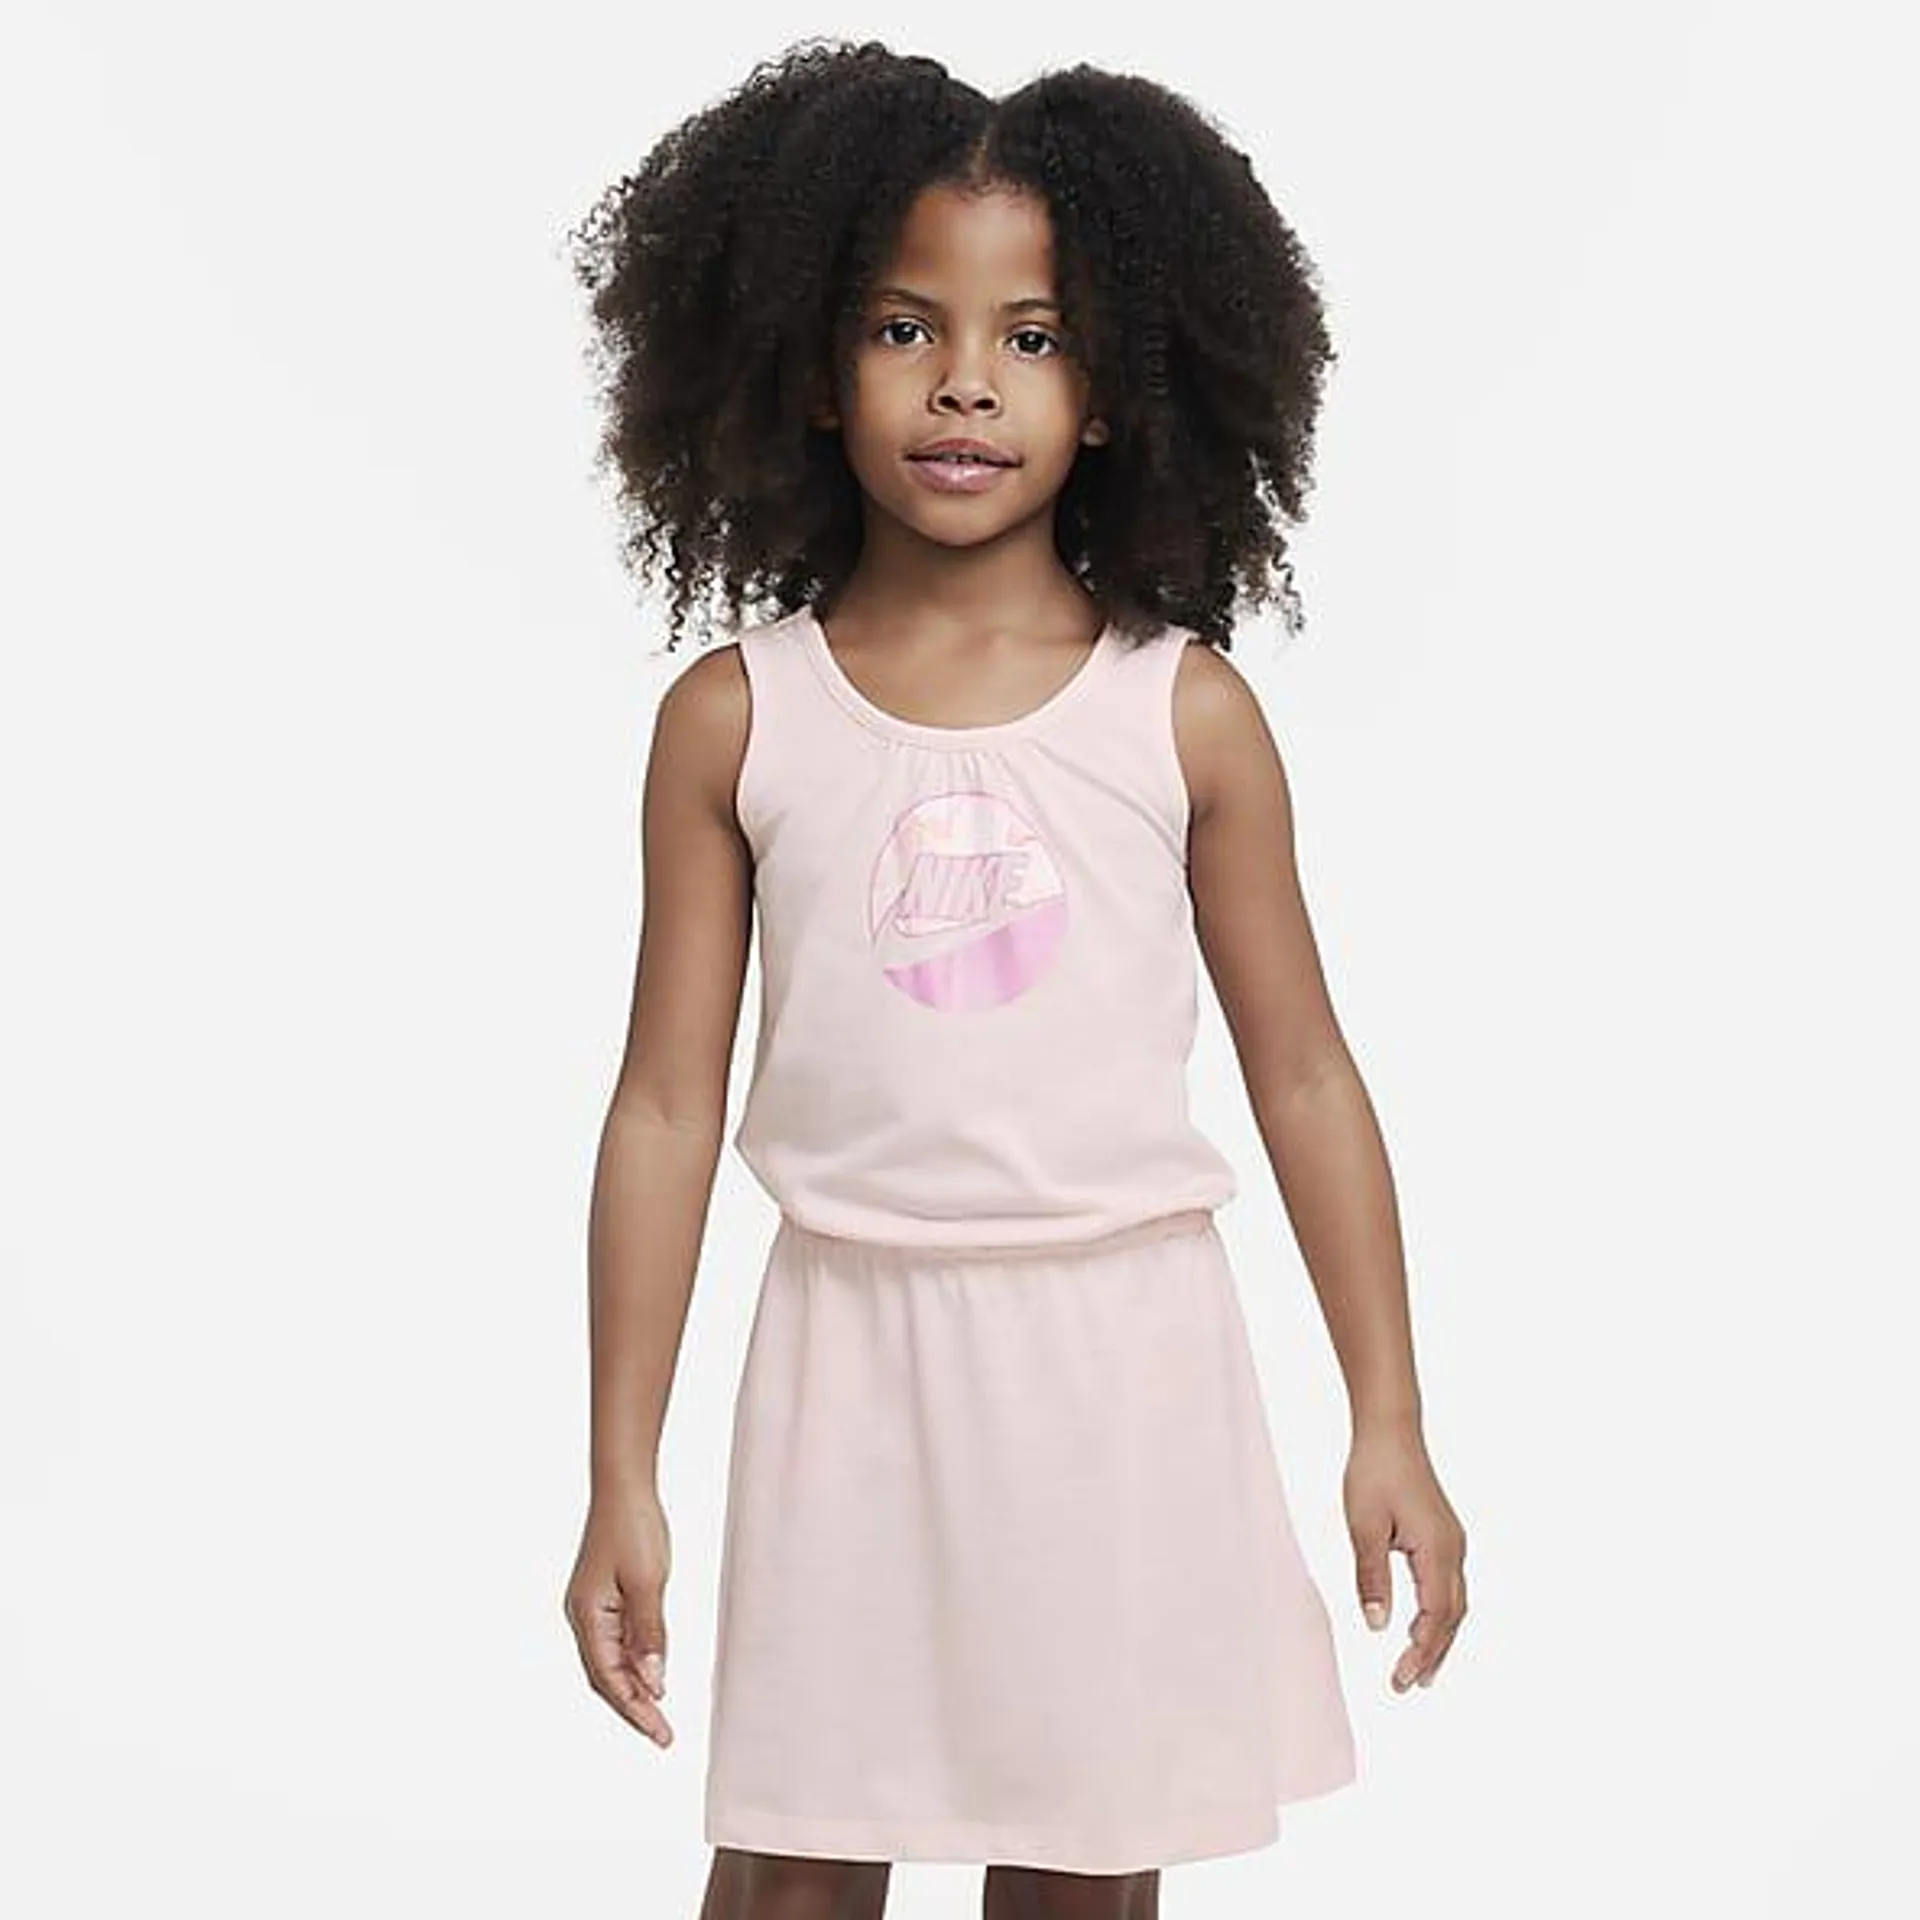 Younger Kids' Dress